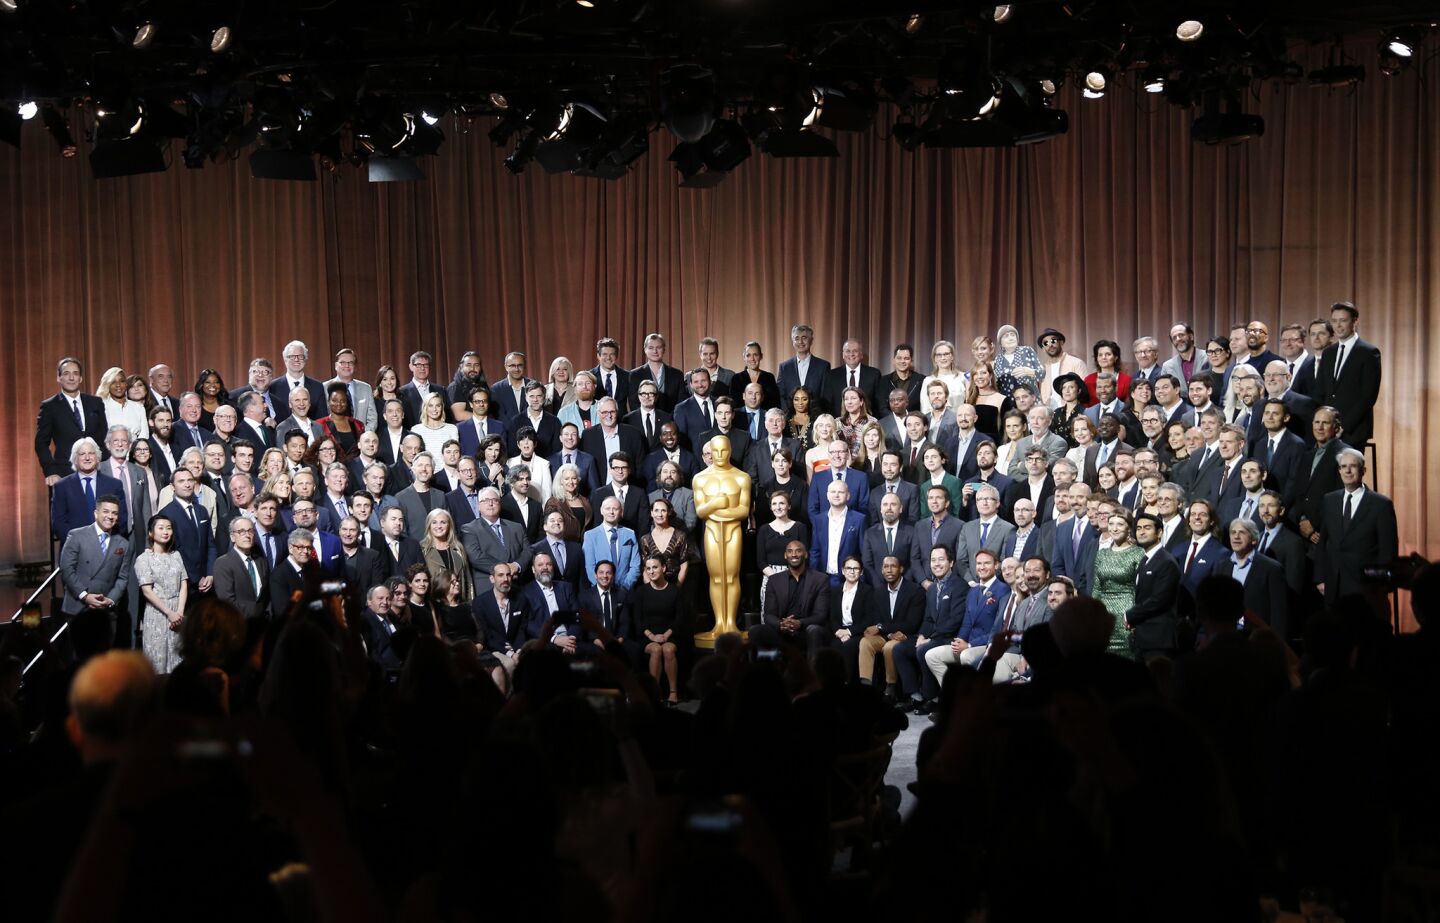 For Oscar nominees, it's time to dine